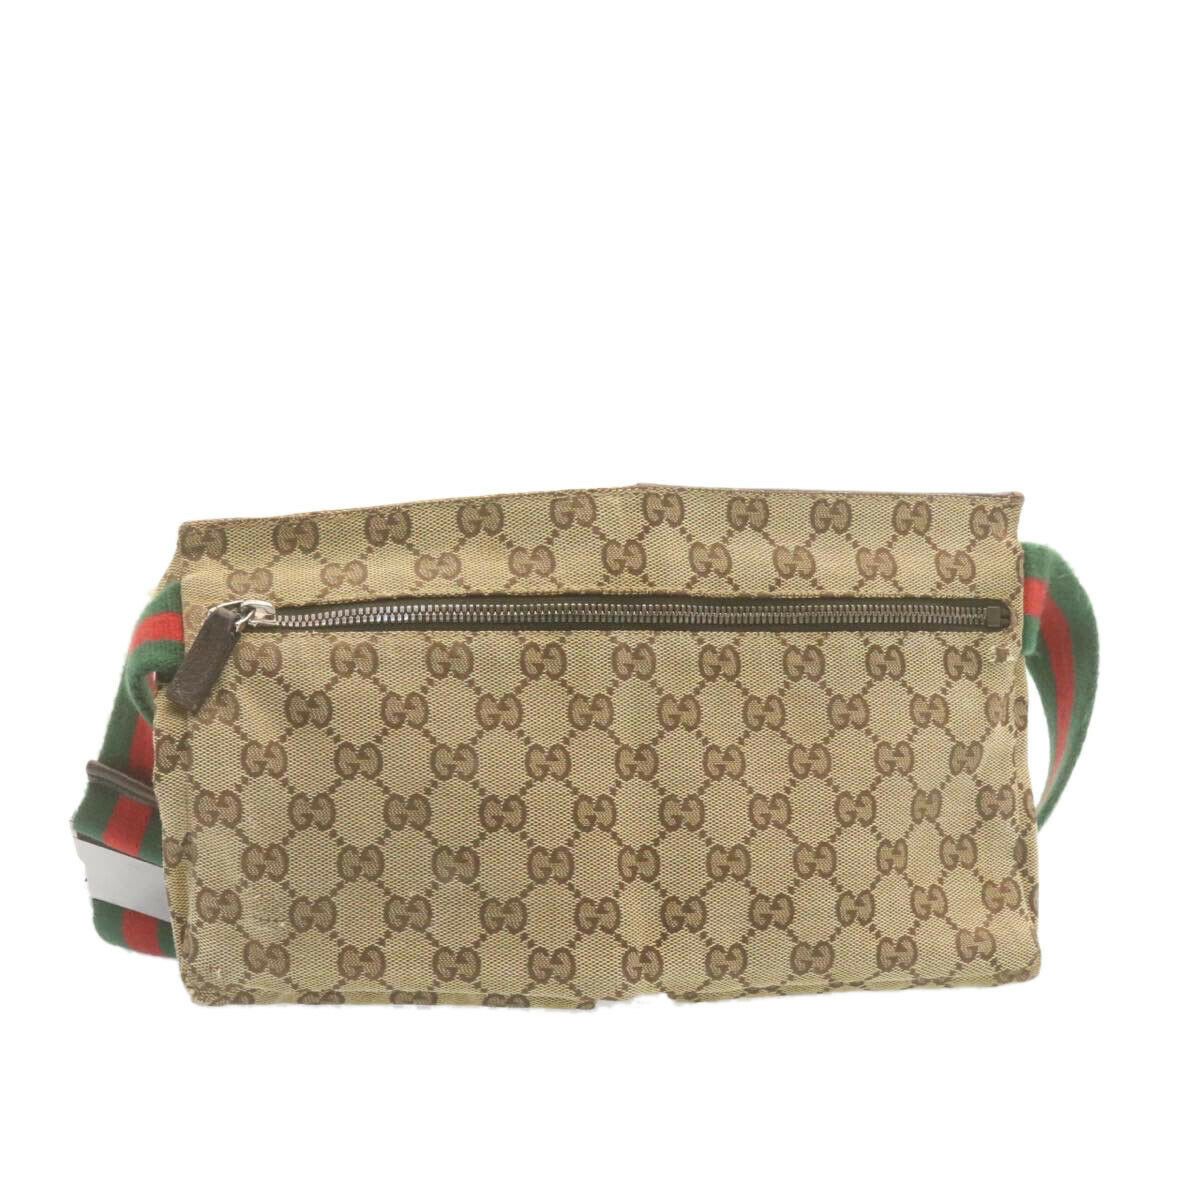 Gucci Monogram Crossbody Bag Size ONE SIZE - 2 Preview